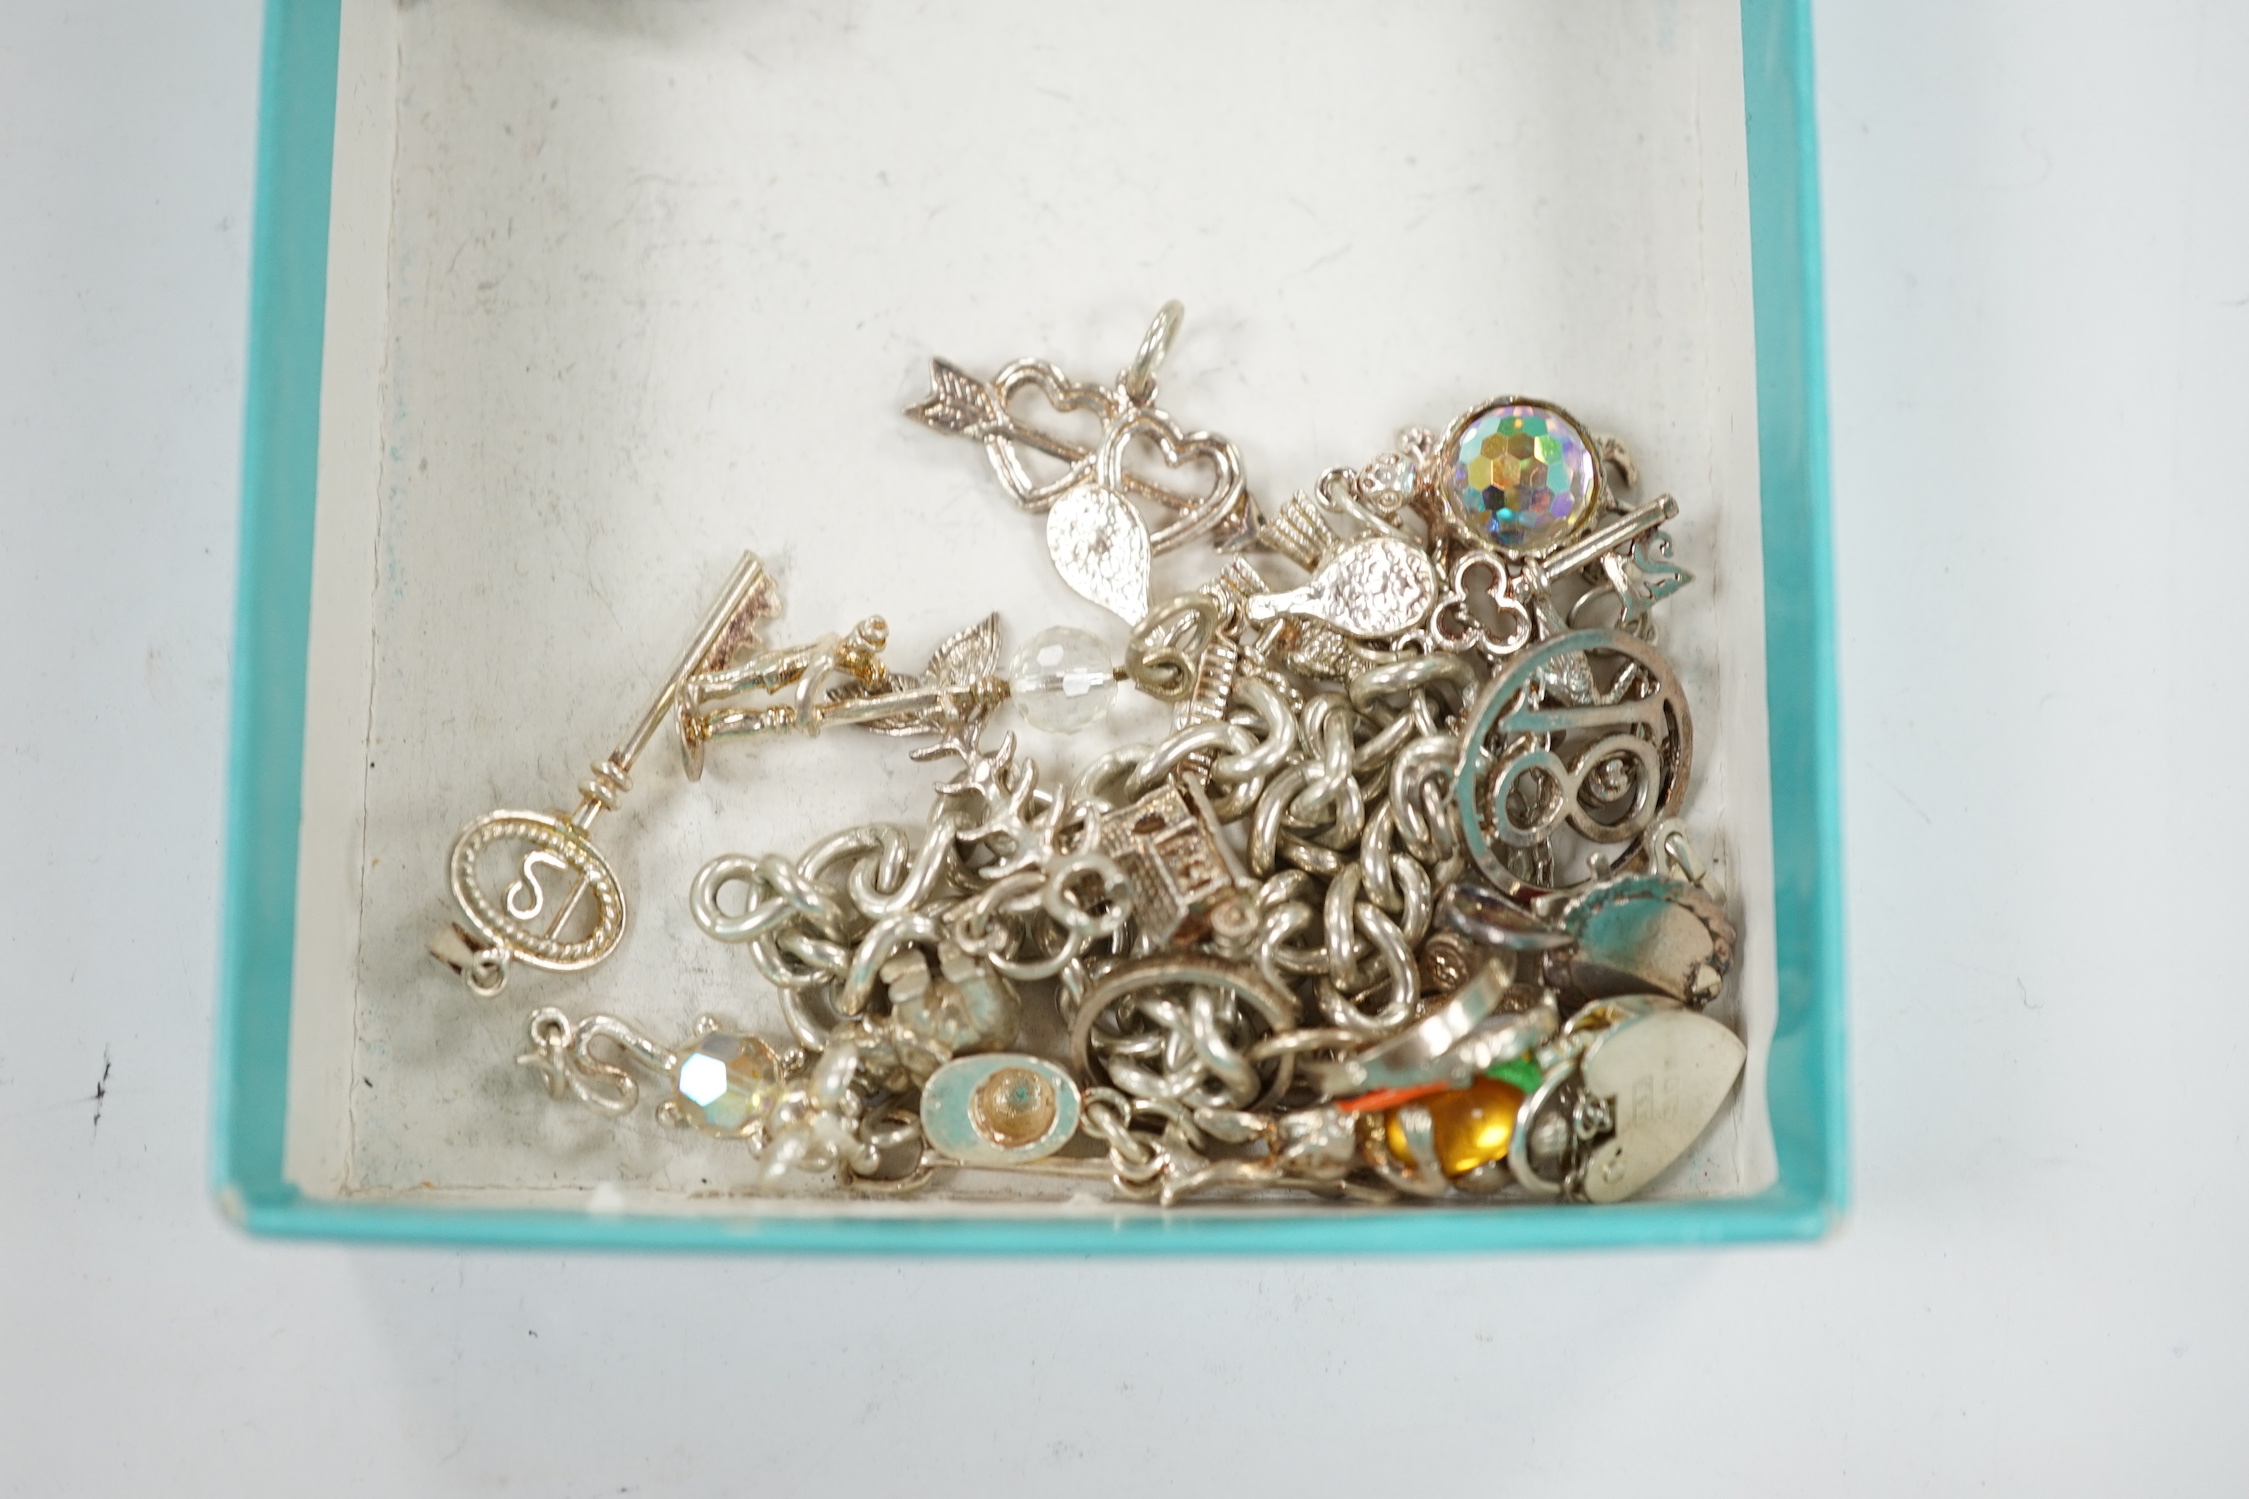 A 1970's silver charm bracelet, hung with assorted charms including birdcage, abacus, piglet, etc. and another silver charm bracelet with loose charms.